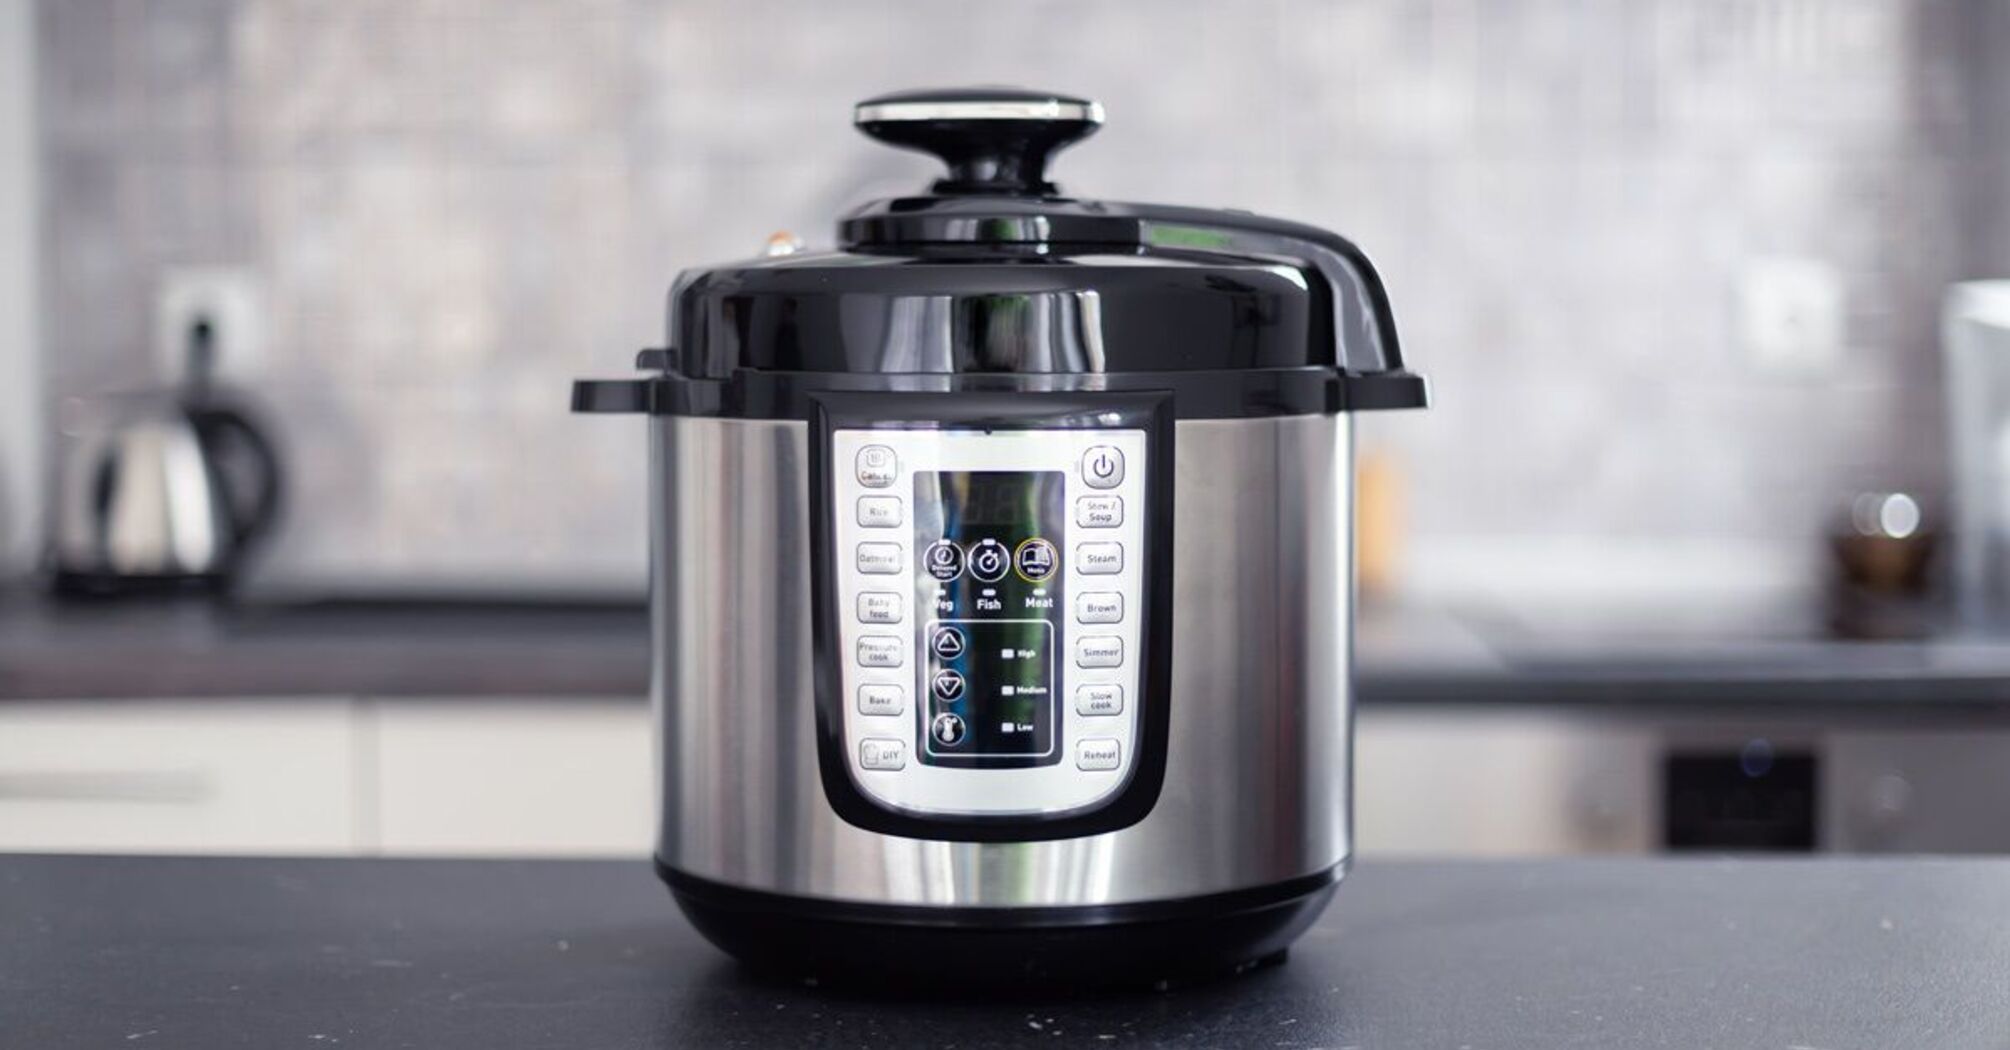 Advantages and disadvantages of a multicooker